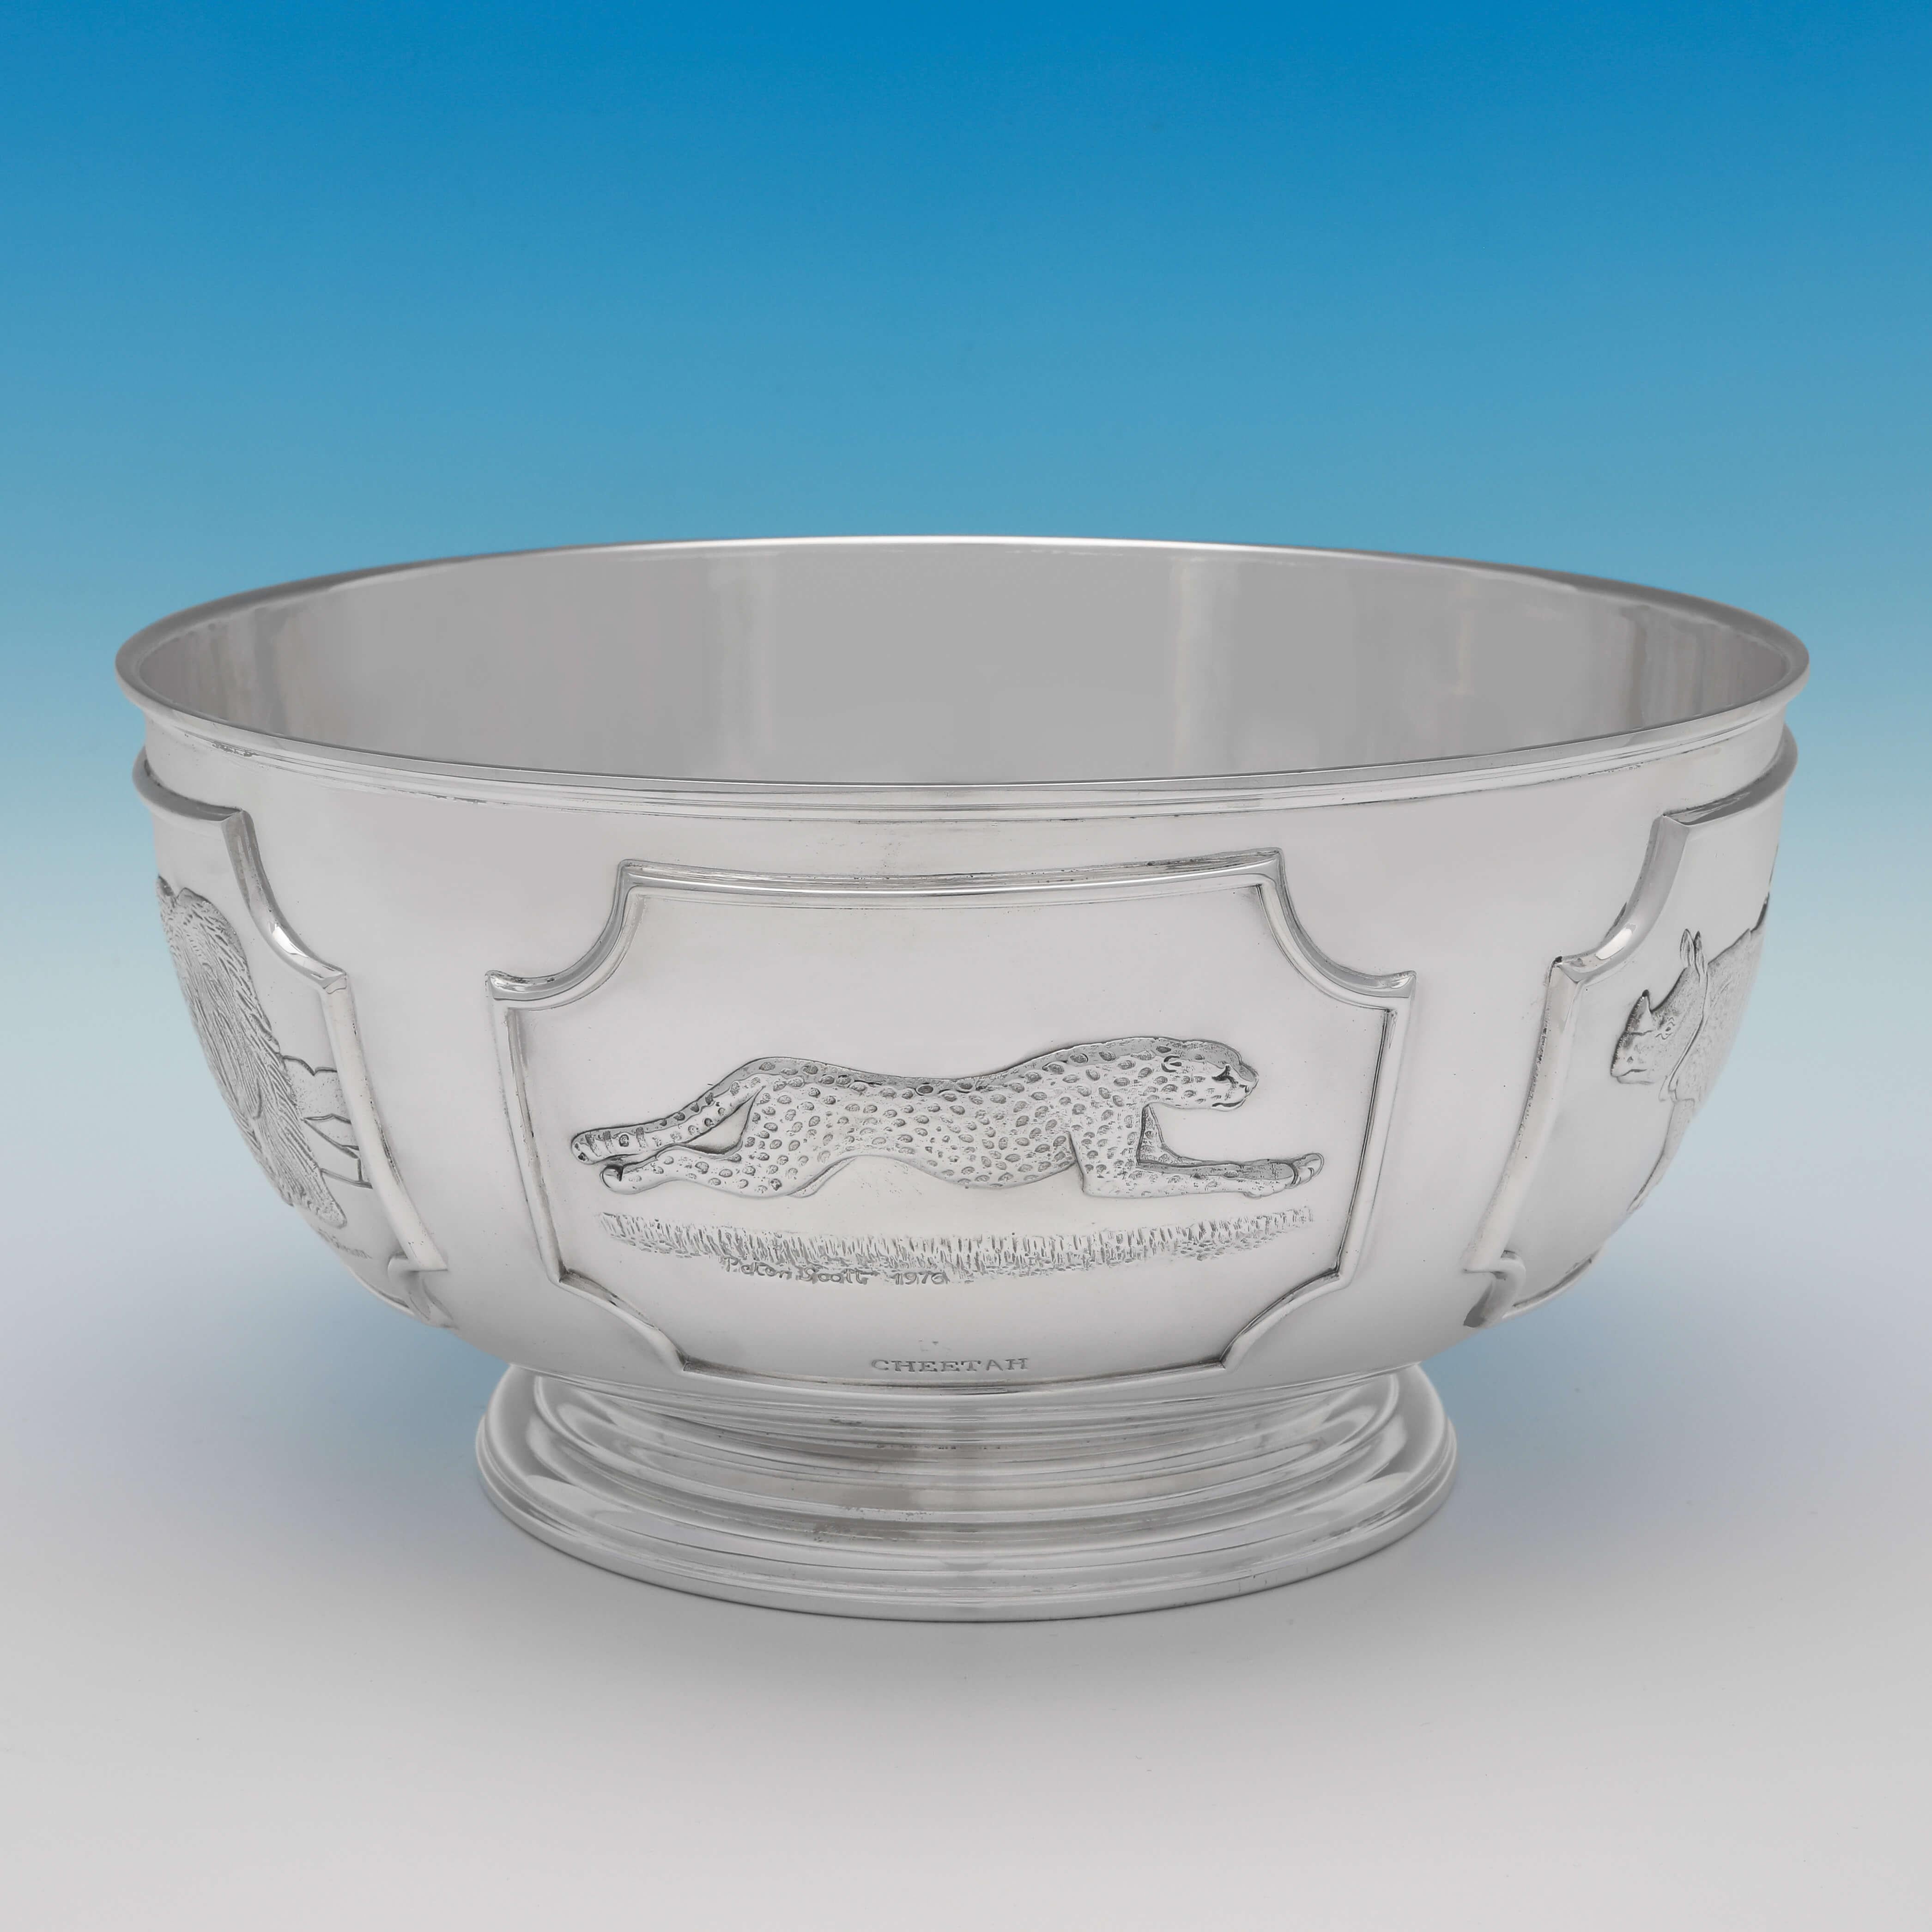 Hallmarked in London in 1977 by Tessiers, this attractive, sterling silver bowl, is edition number 117 of a limited edition of 2000 produced by Tessiers of Bond Street, who were commissioned to produce them by the World Wildlife Fund. 
The bowl